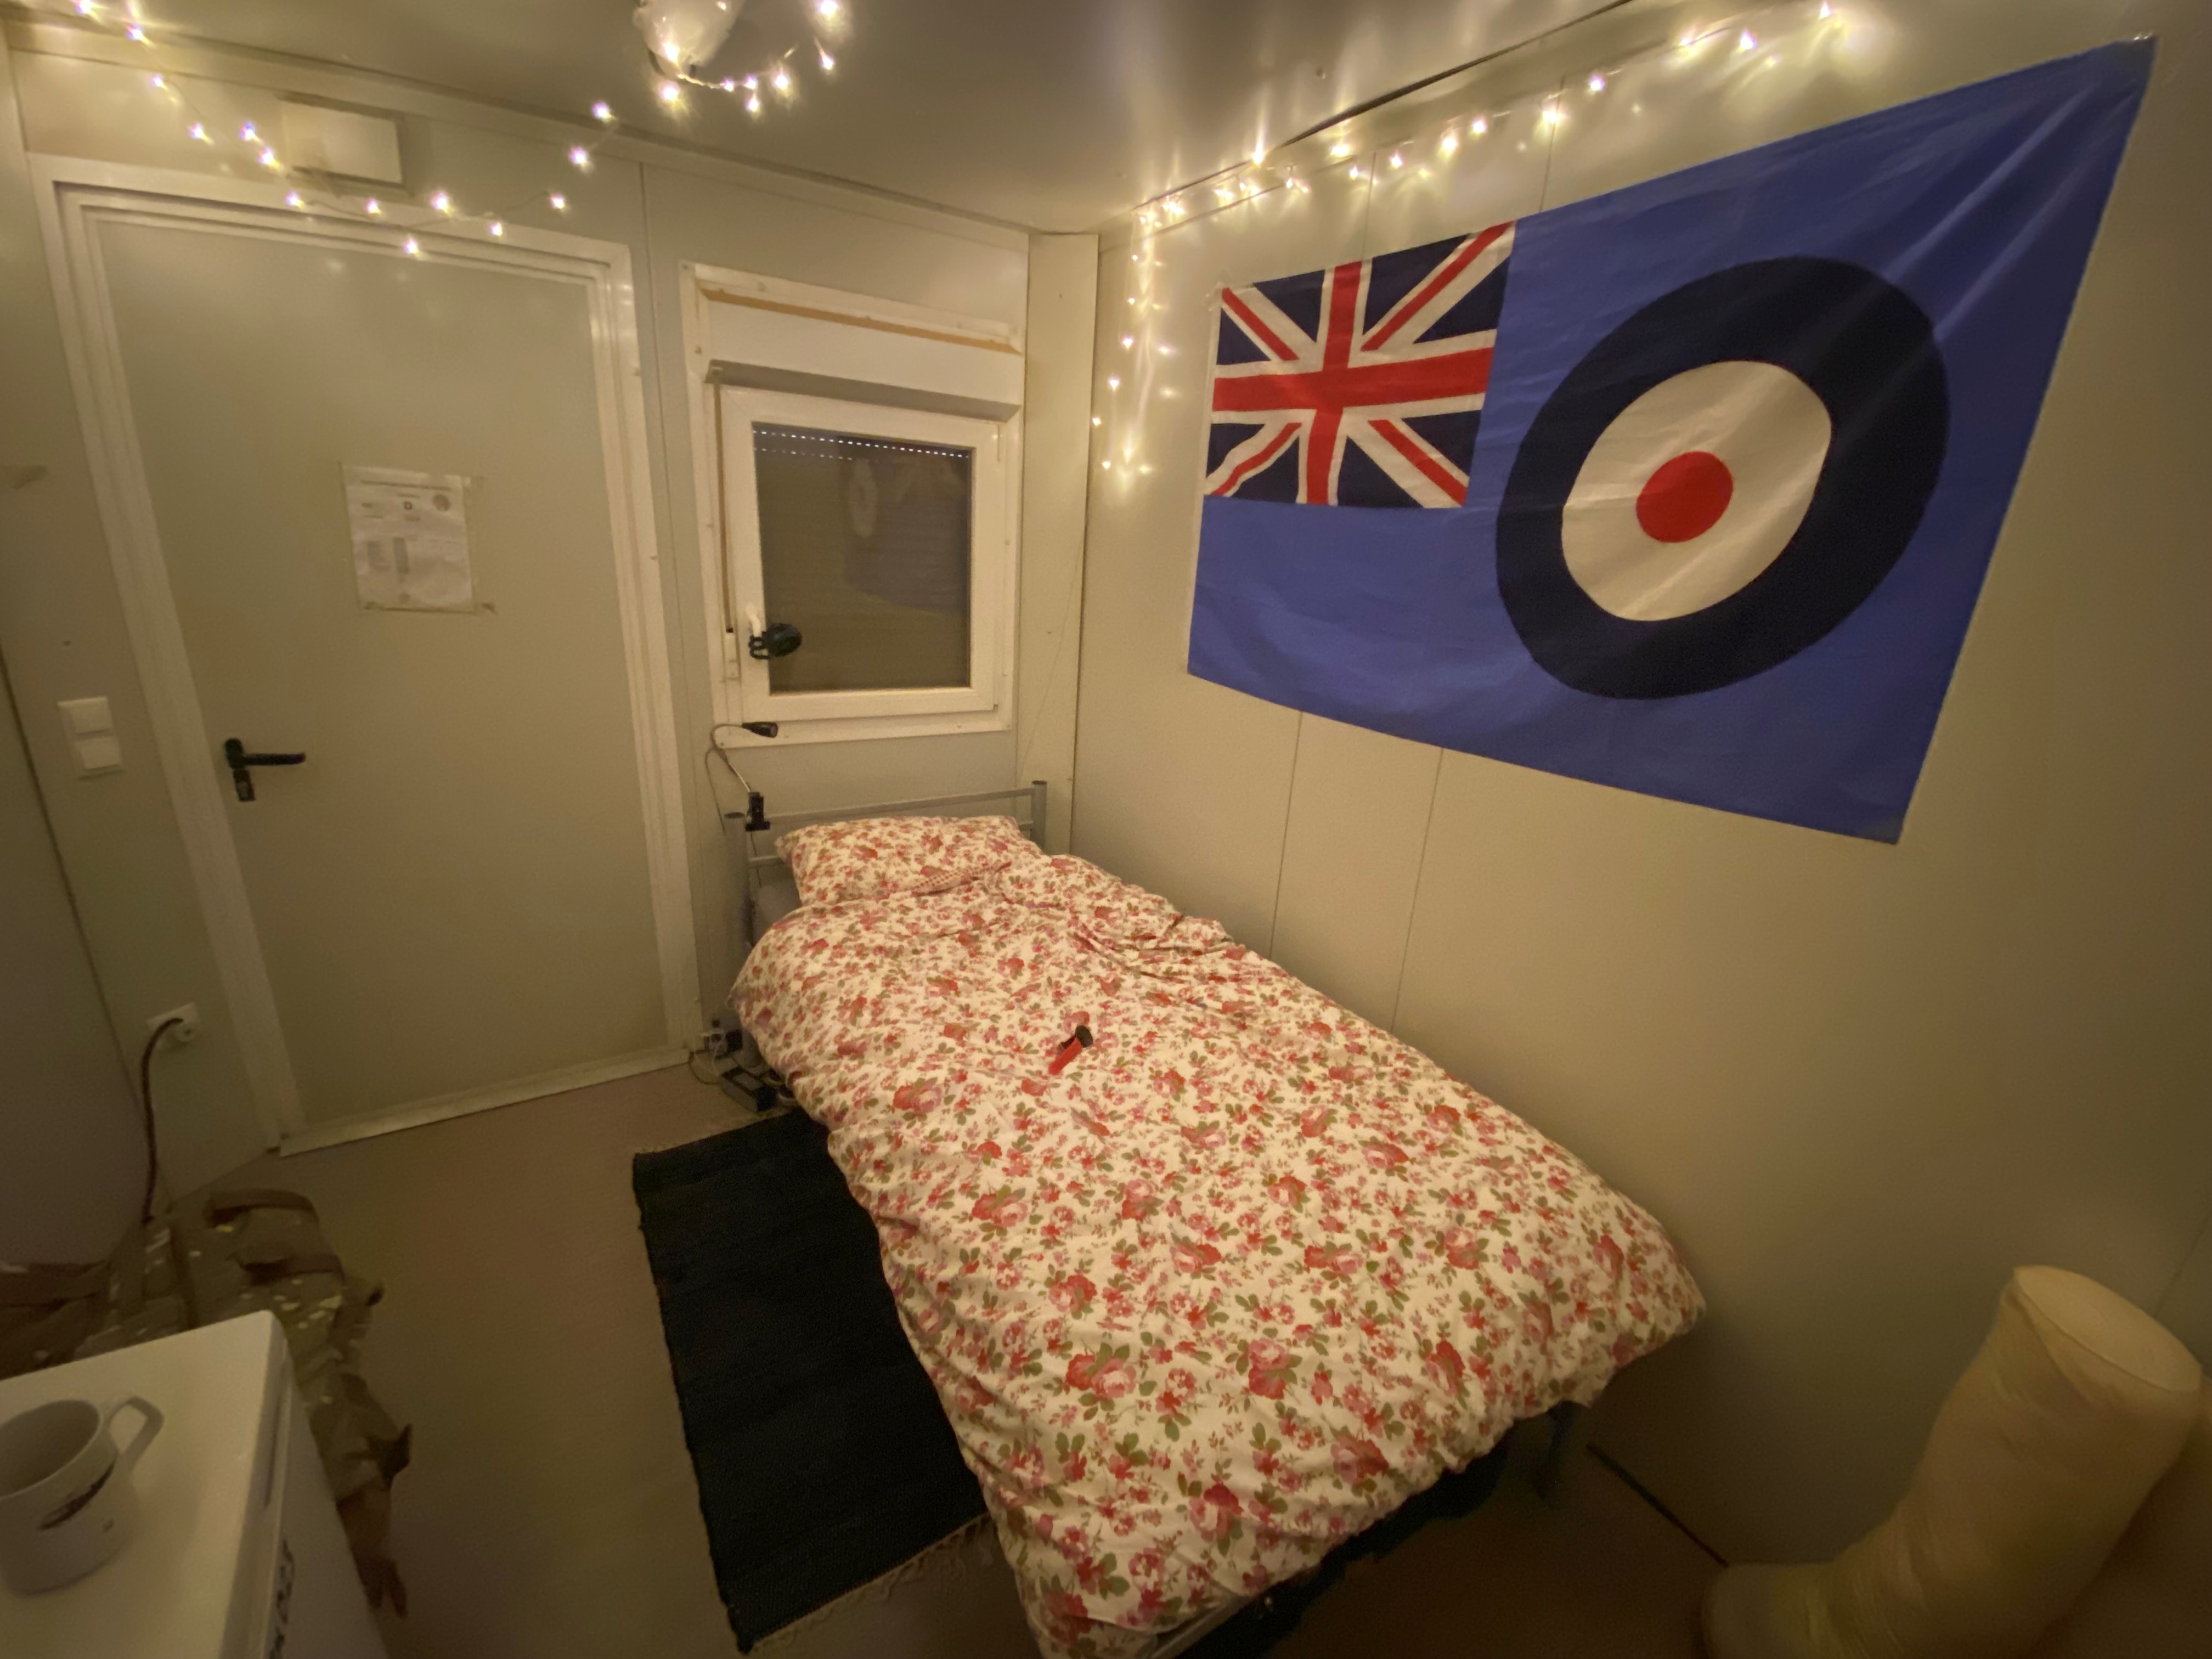 Bed quarters and RAF flag hanging on the wall. 